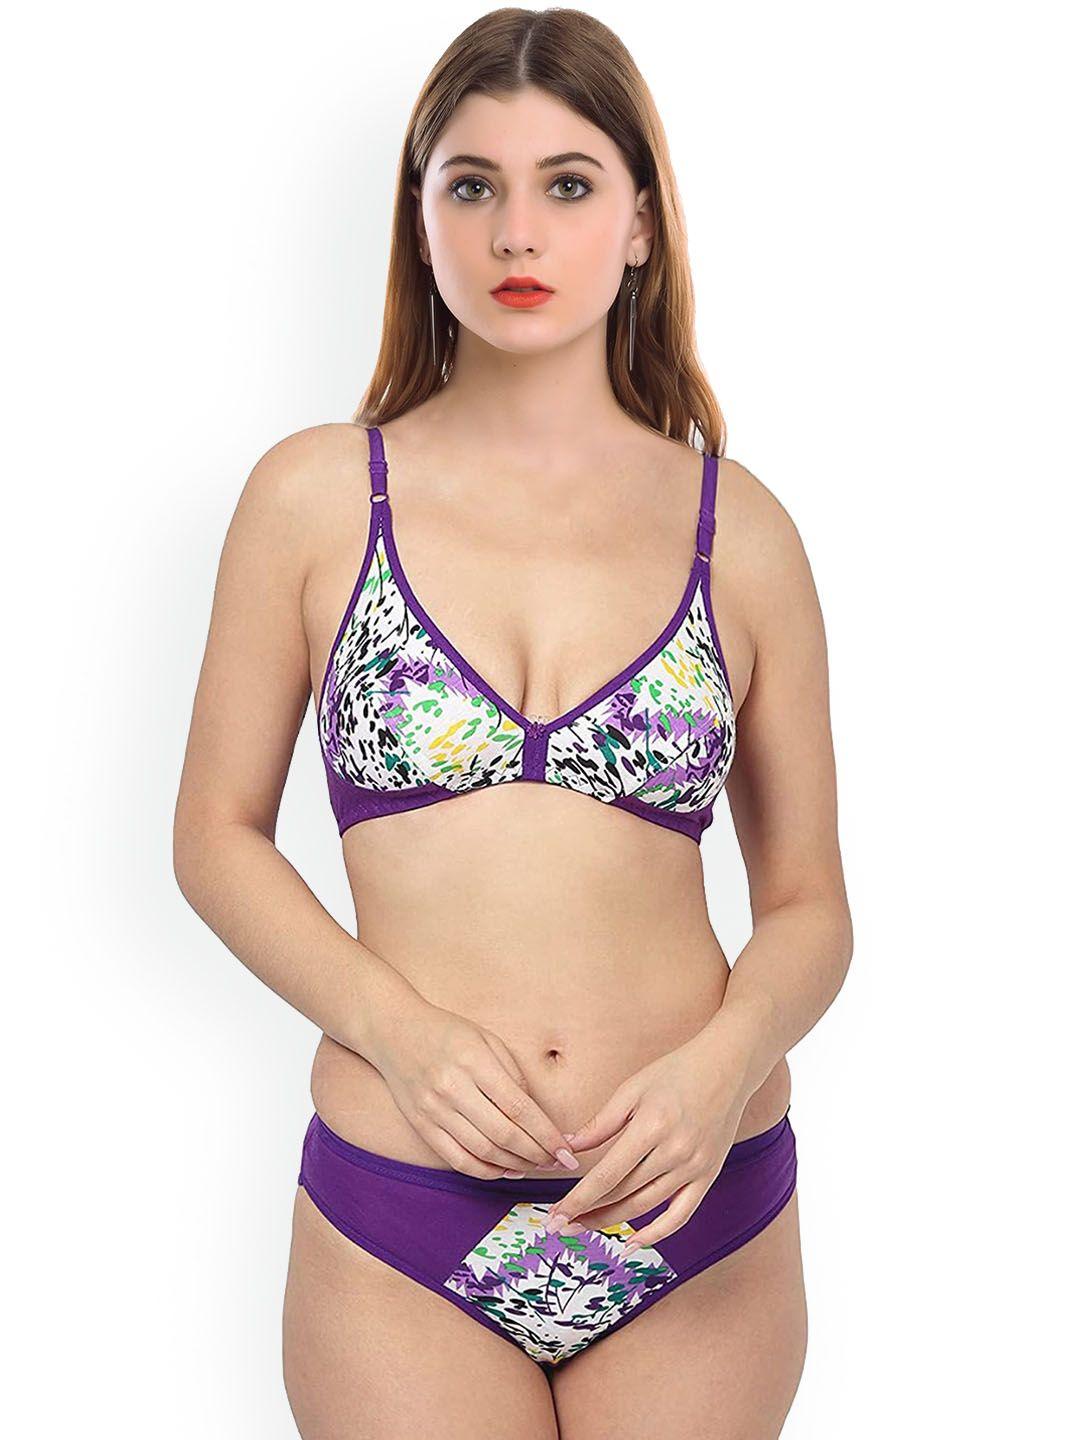 arousy printed cotton lingerie set by_tiger set_purple_30